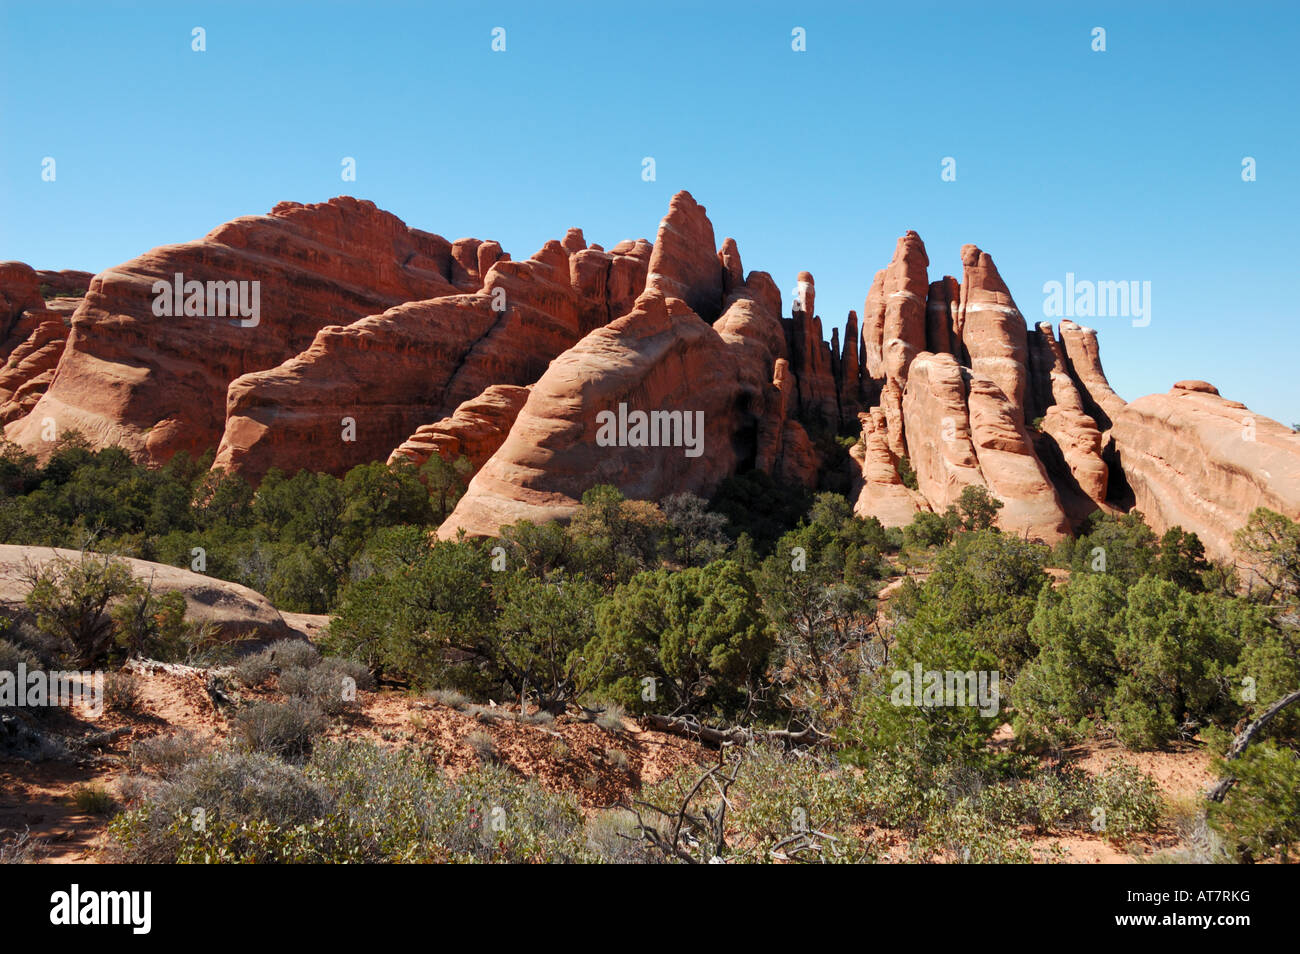 Fins of red sandstone. Arches National Park, Moab, Utah. Stock Photo